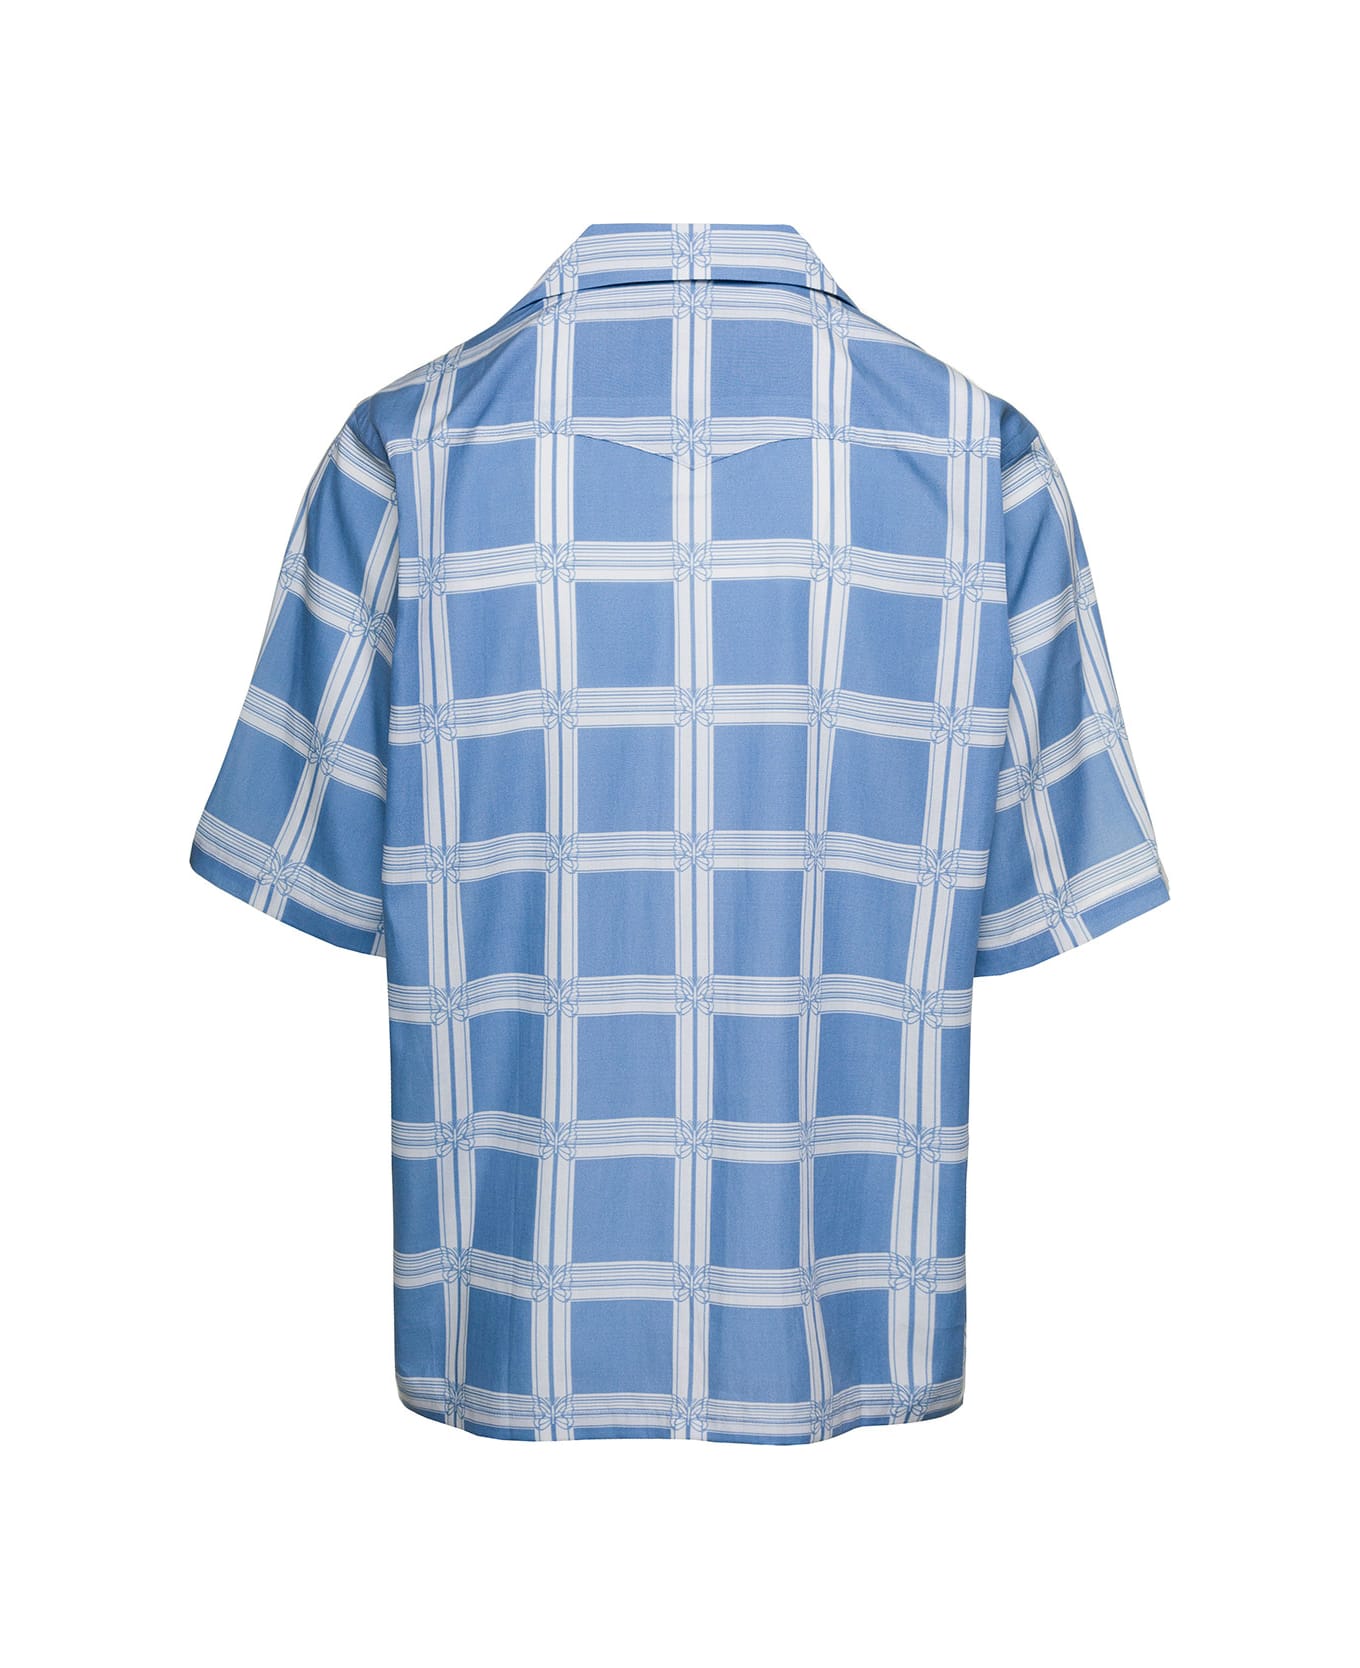 Needles Light Blue Bowling Shirt With All-over Graphic Print In Cotton Blend Man - Light blue